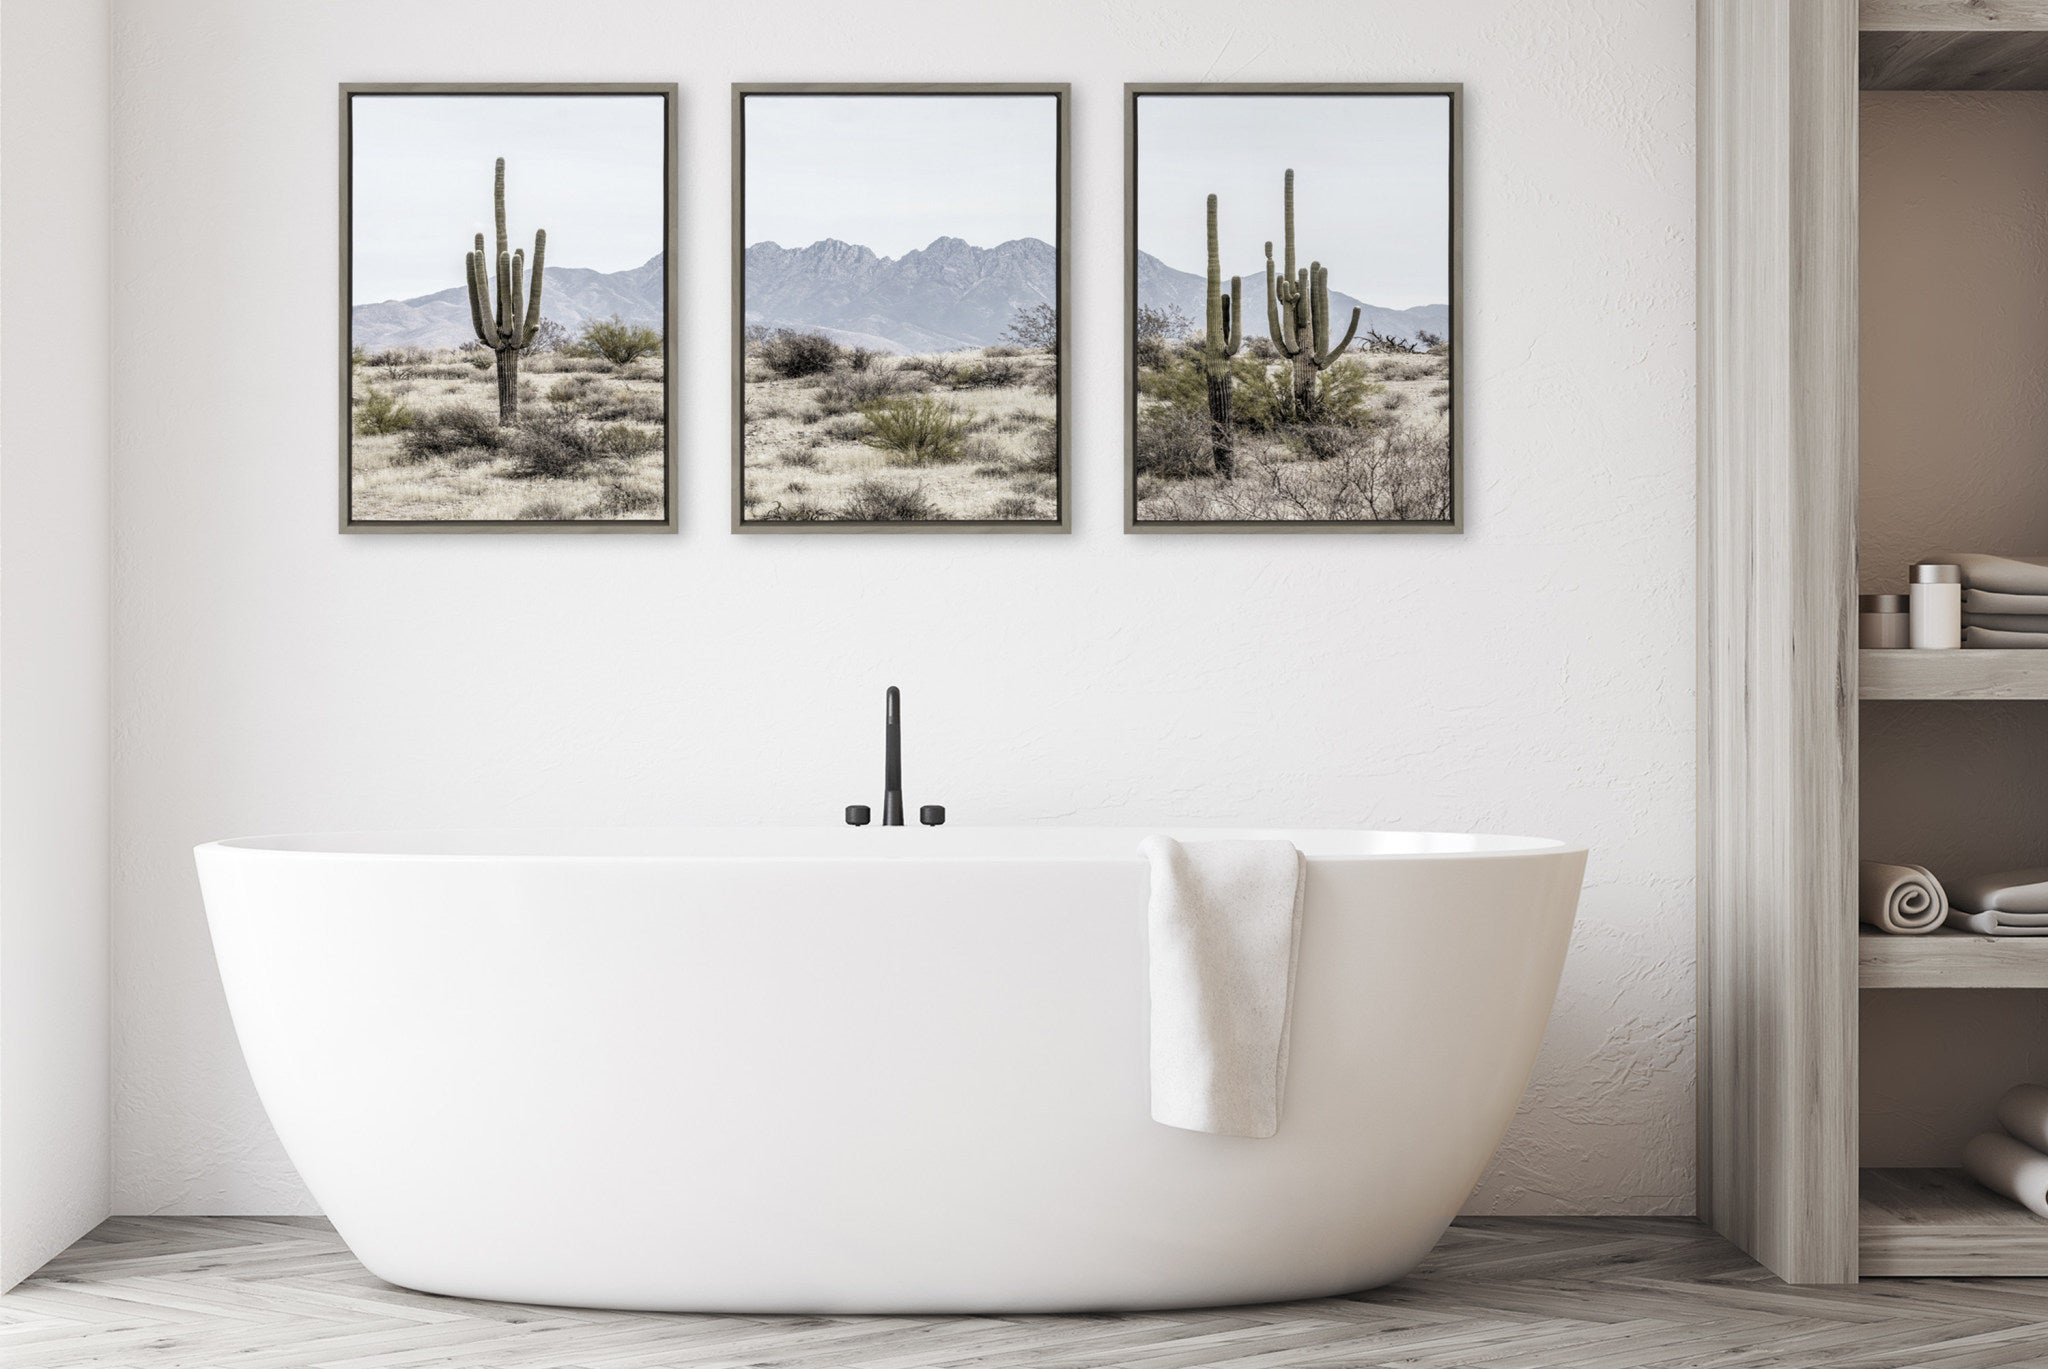 Sylvie Tall Saguaro Cacti Desert Mountain Left, Middle and Right Framed Canvas by The Creative Bunch Studio